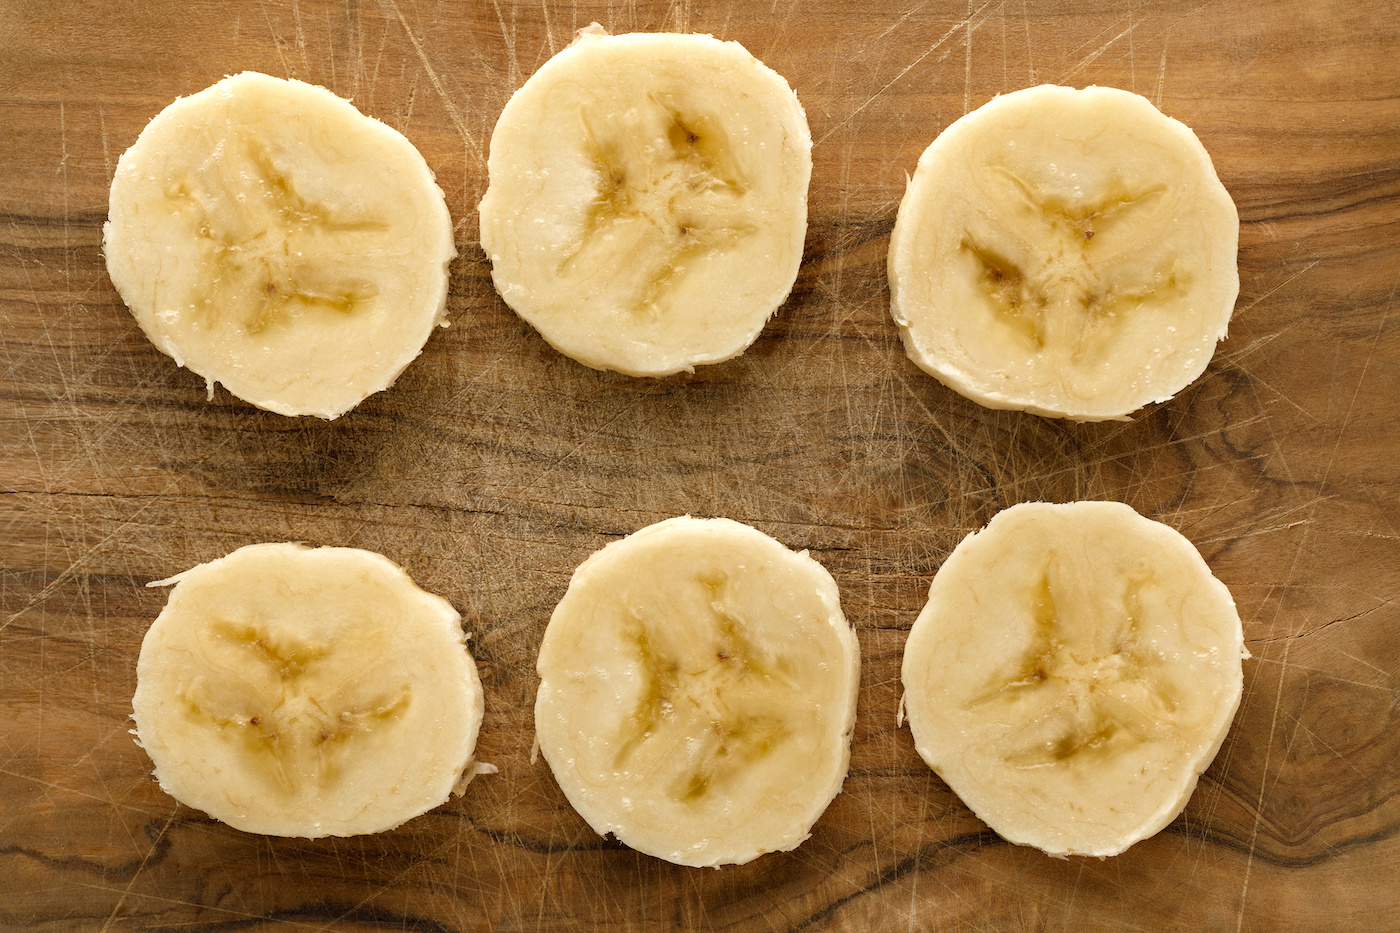 Banana slices on a wooden board